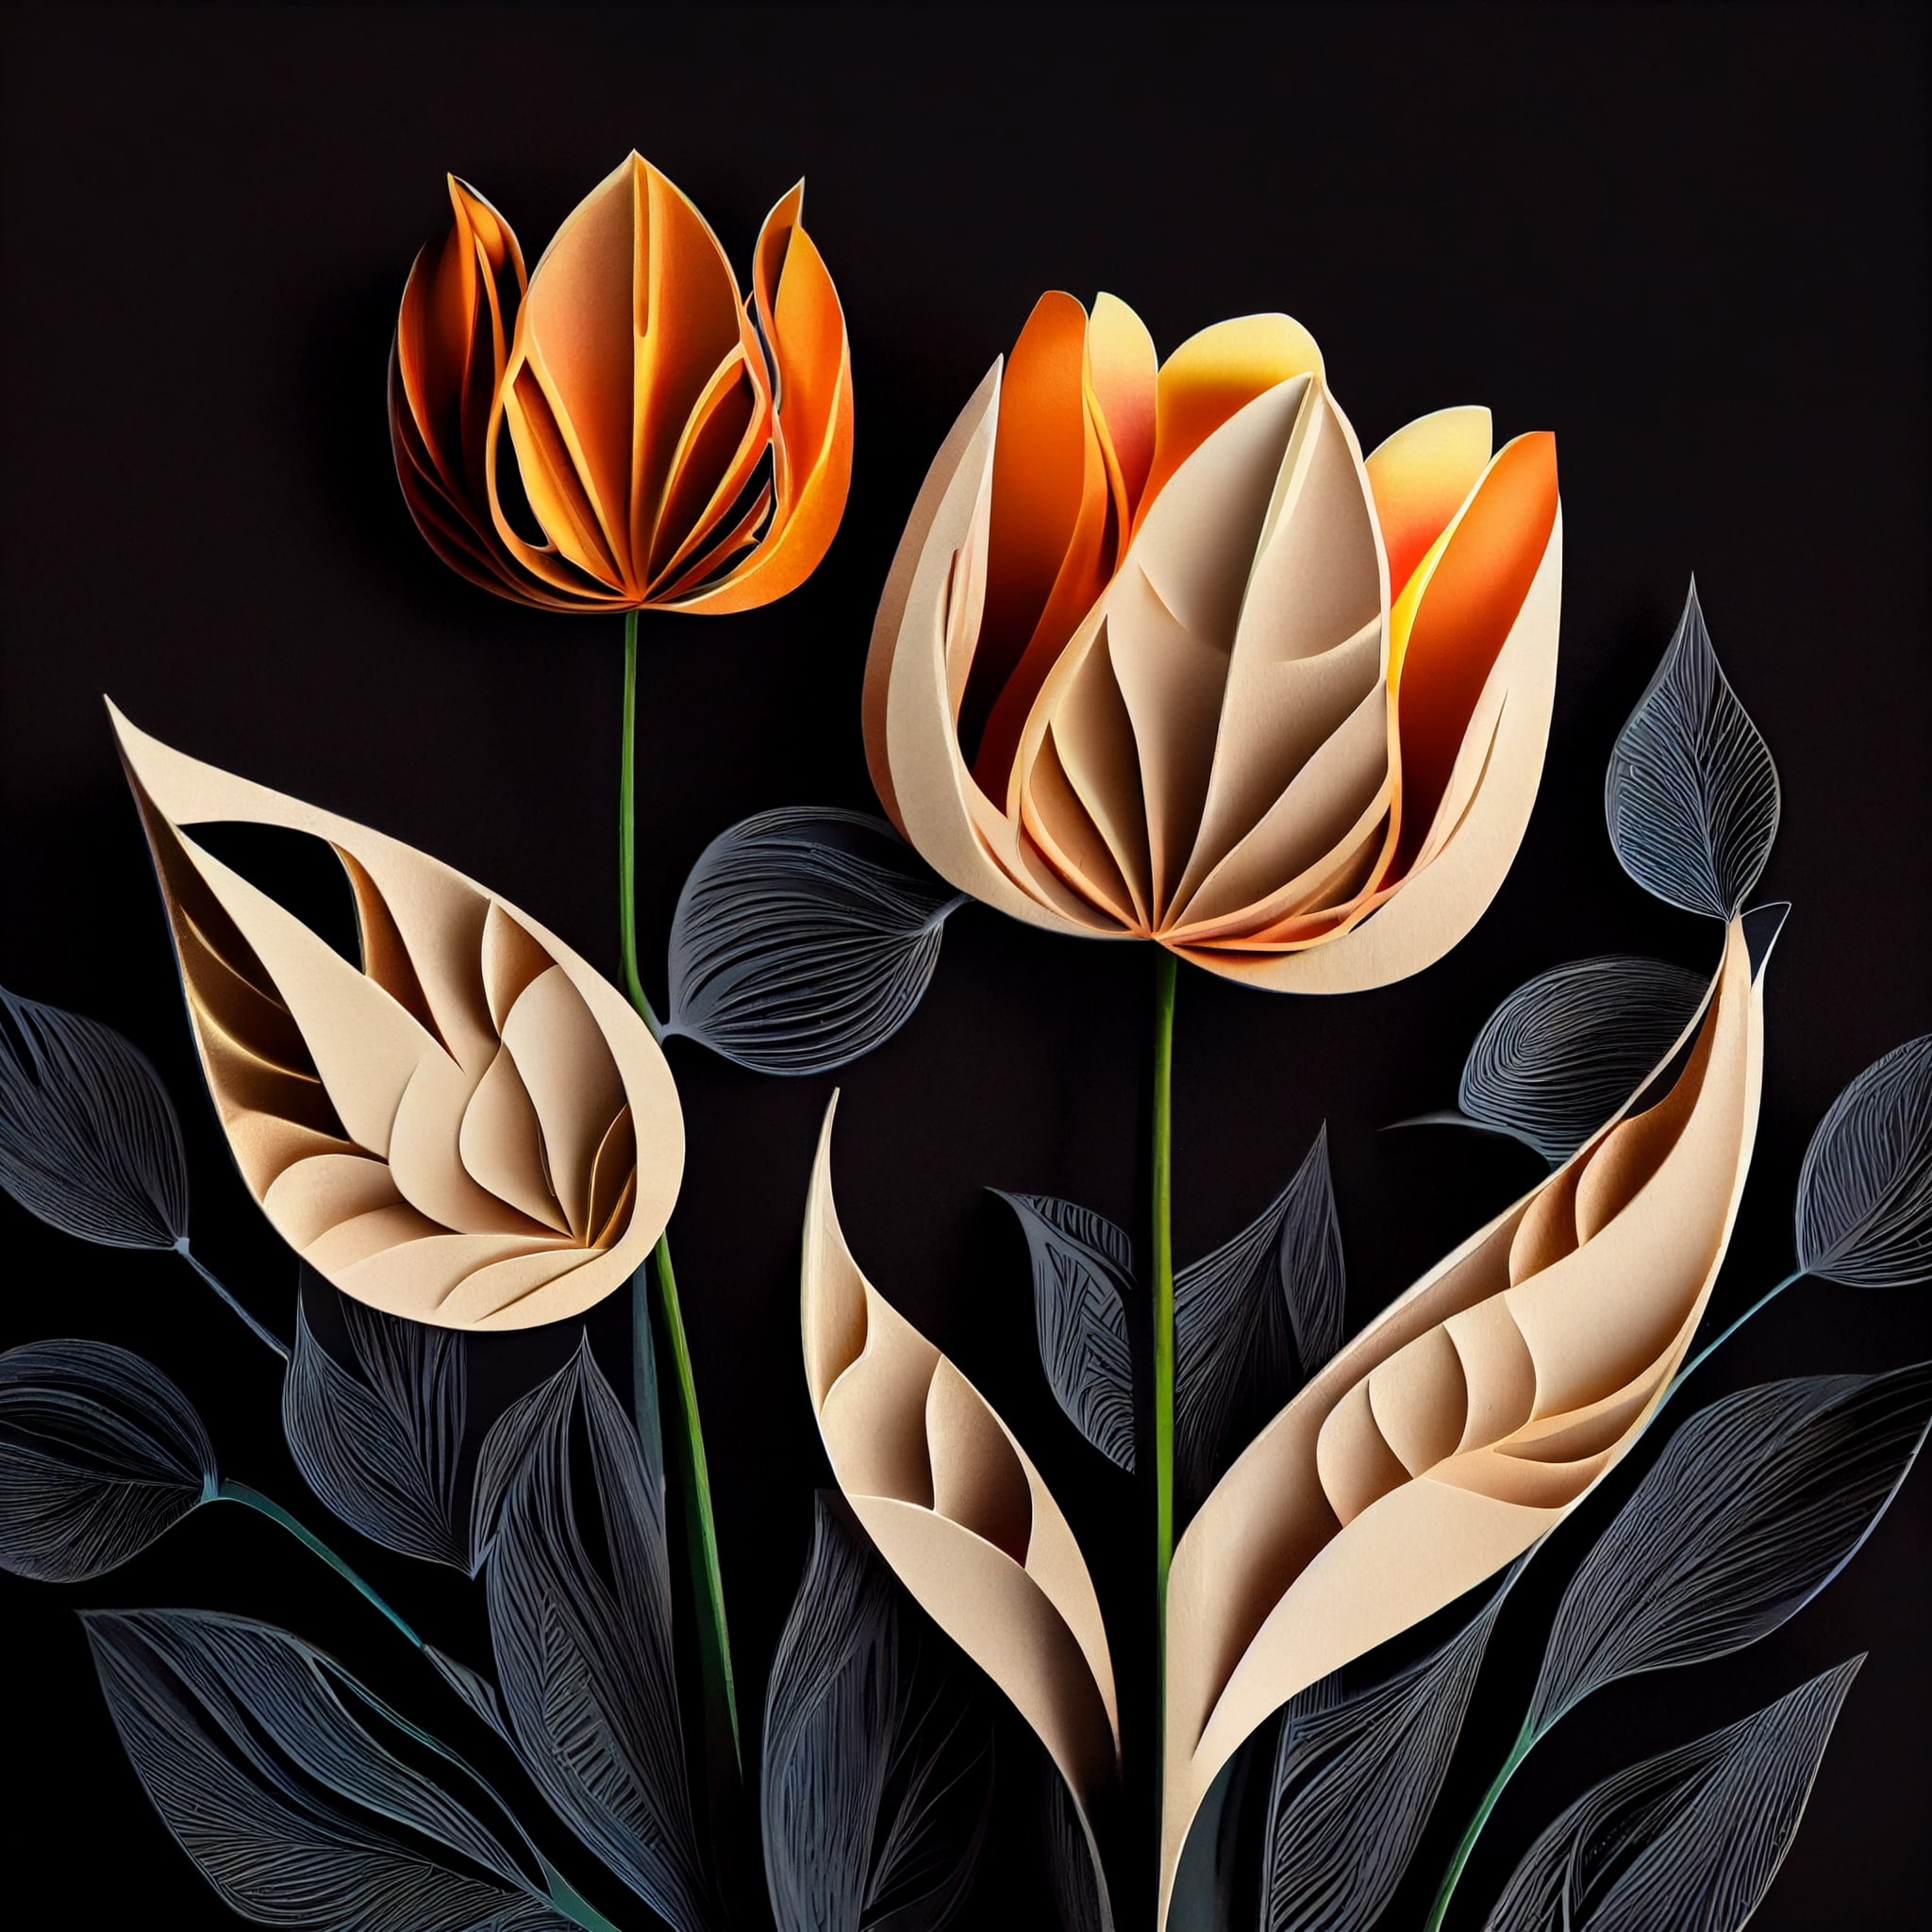 Three paper flowers with leaves on a black background.